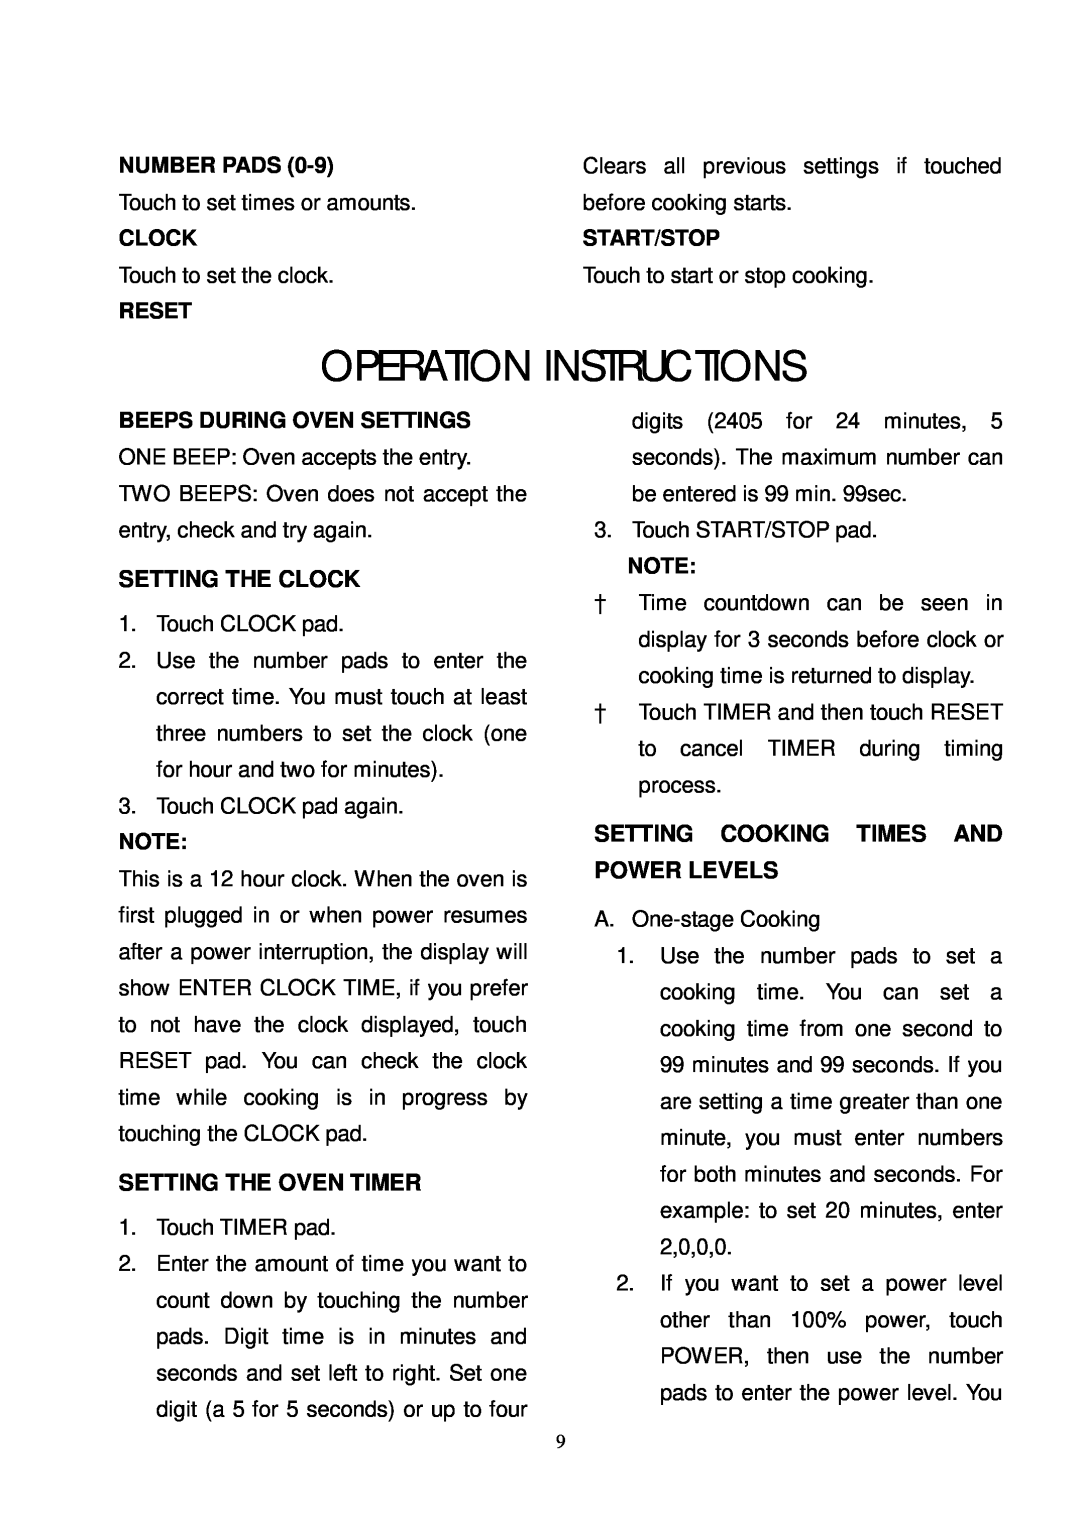 Sunbeam SMW700 Operation Instructions, Setting The Clock, Setting The Oven Timer, Setting Cooking Times And Power Levels 